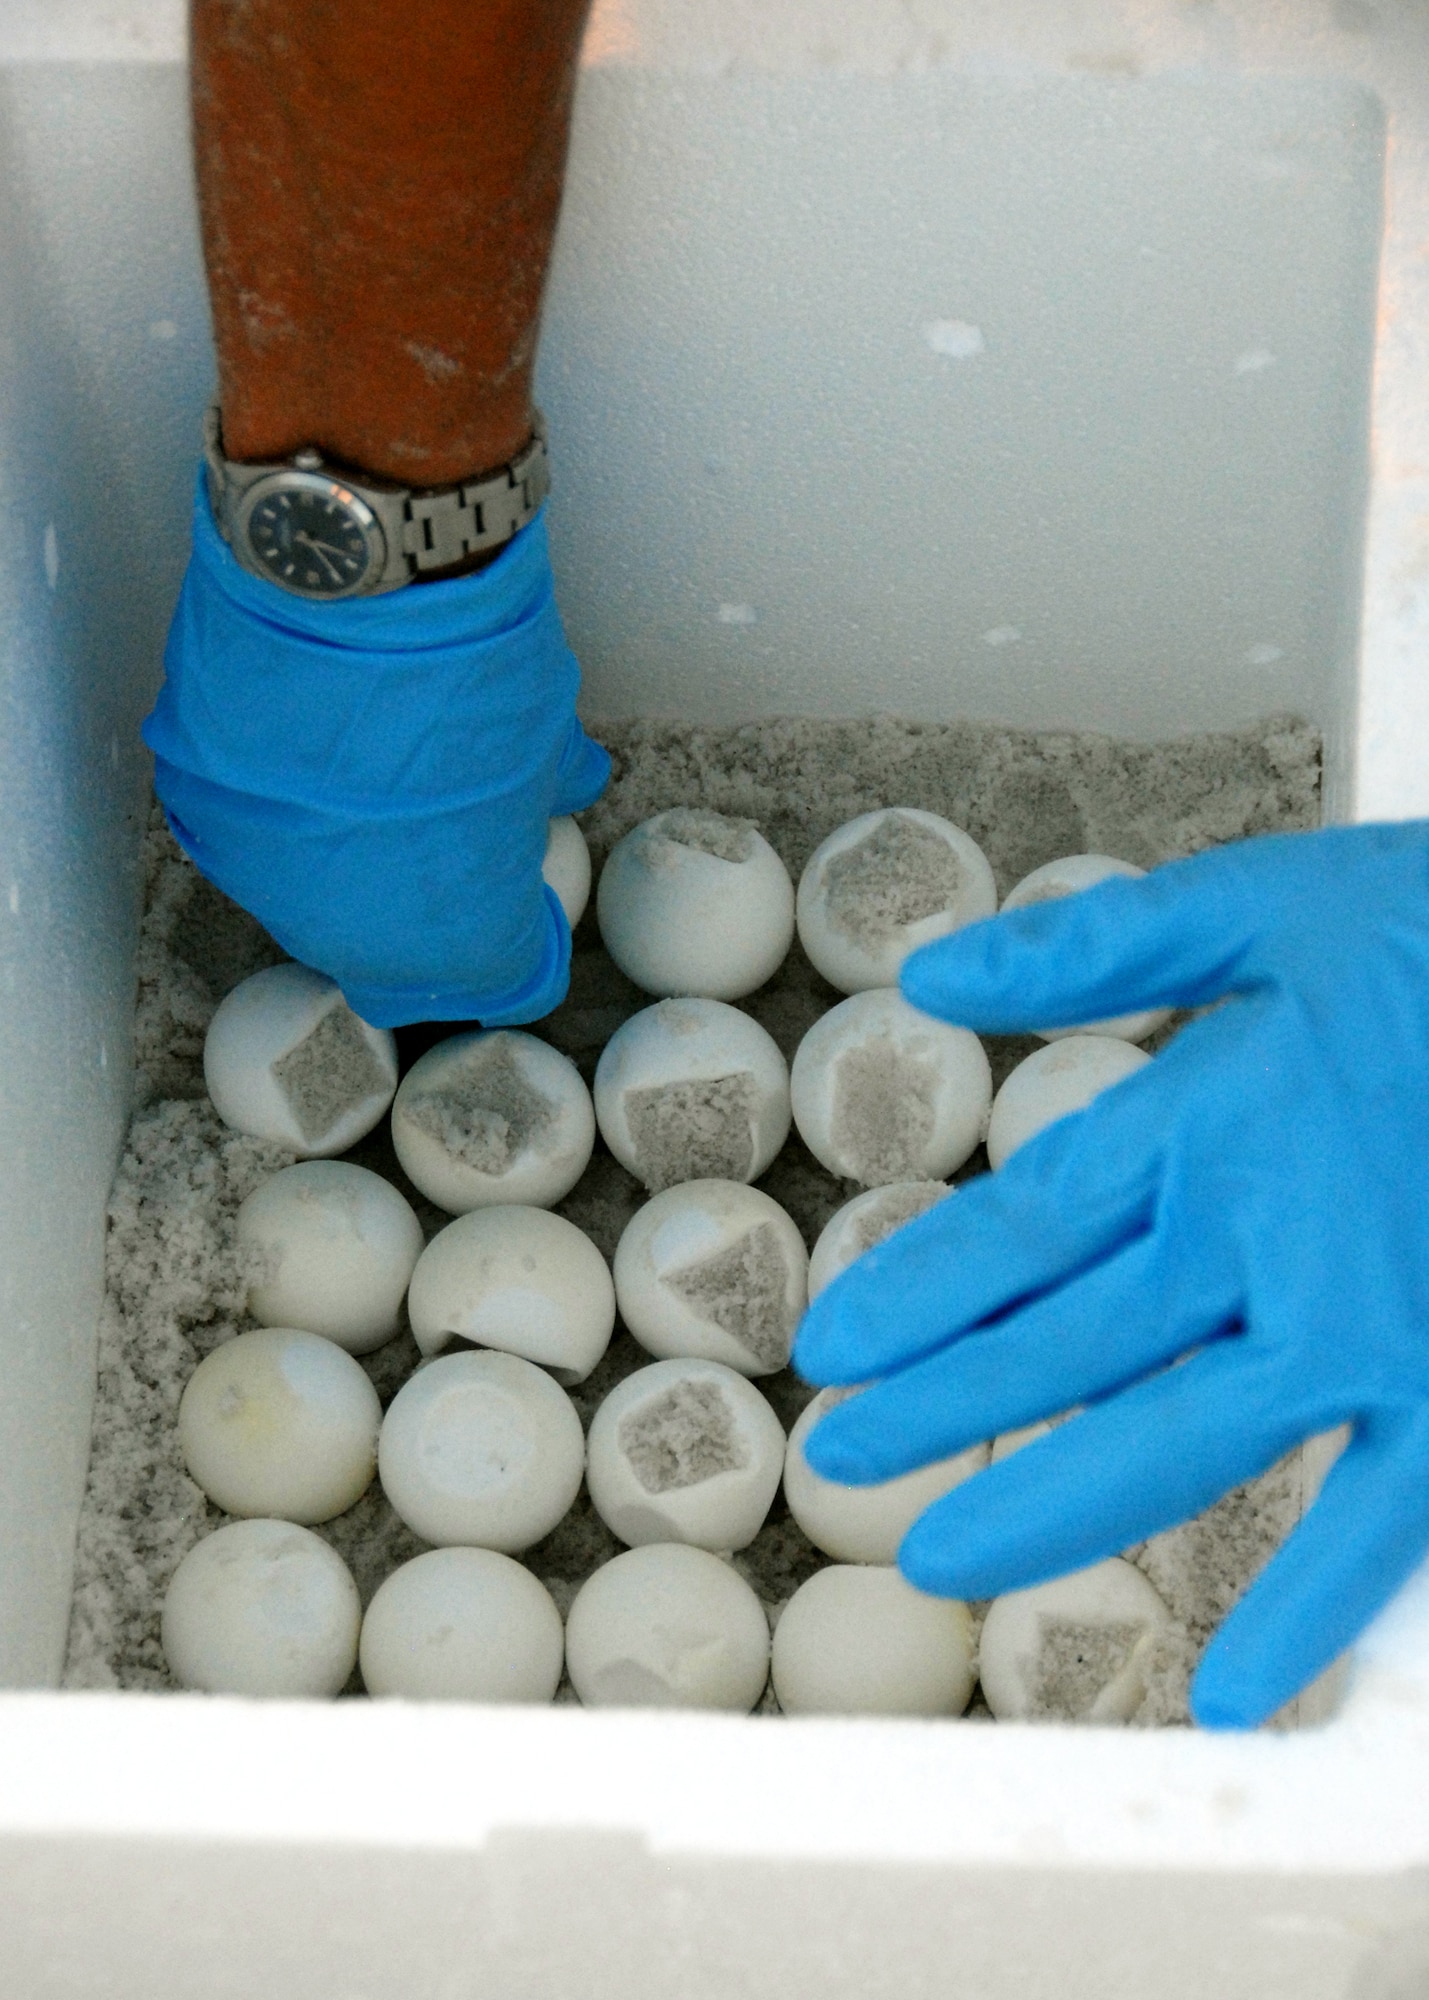 A 96th Civil Engineer Squadron biologist carefully places another sea turtle egg in a cooler at one of Eglin Air Force Base’s beaches Aug. 2.  The eggs will be transported to the east coast so the turtles can be released without the threat of encountering oil from the spill in the Gulf of Mexico.  The group of biologists removed 117 eggs from the nest on this day and more than 300 eggs have been moved so far.  (U.S. Air Force photo/Samuel King Jr.)